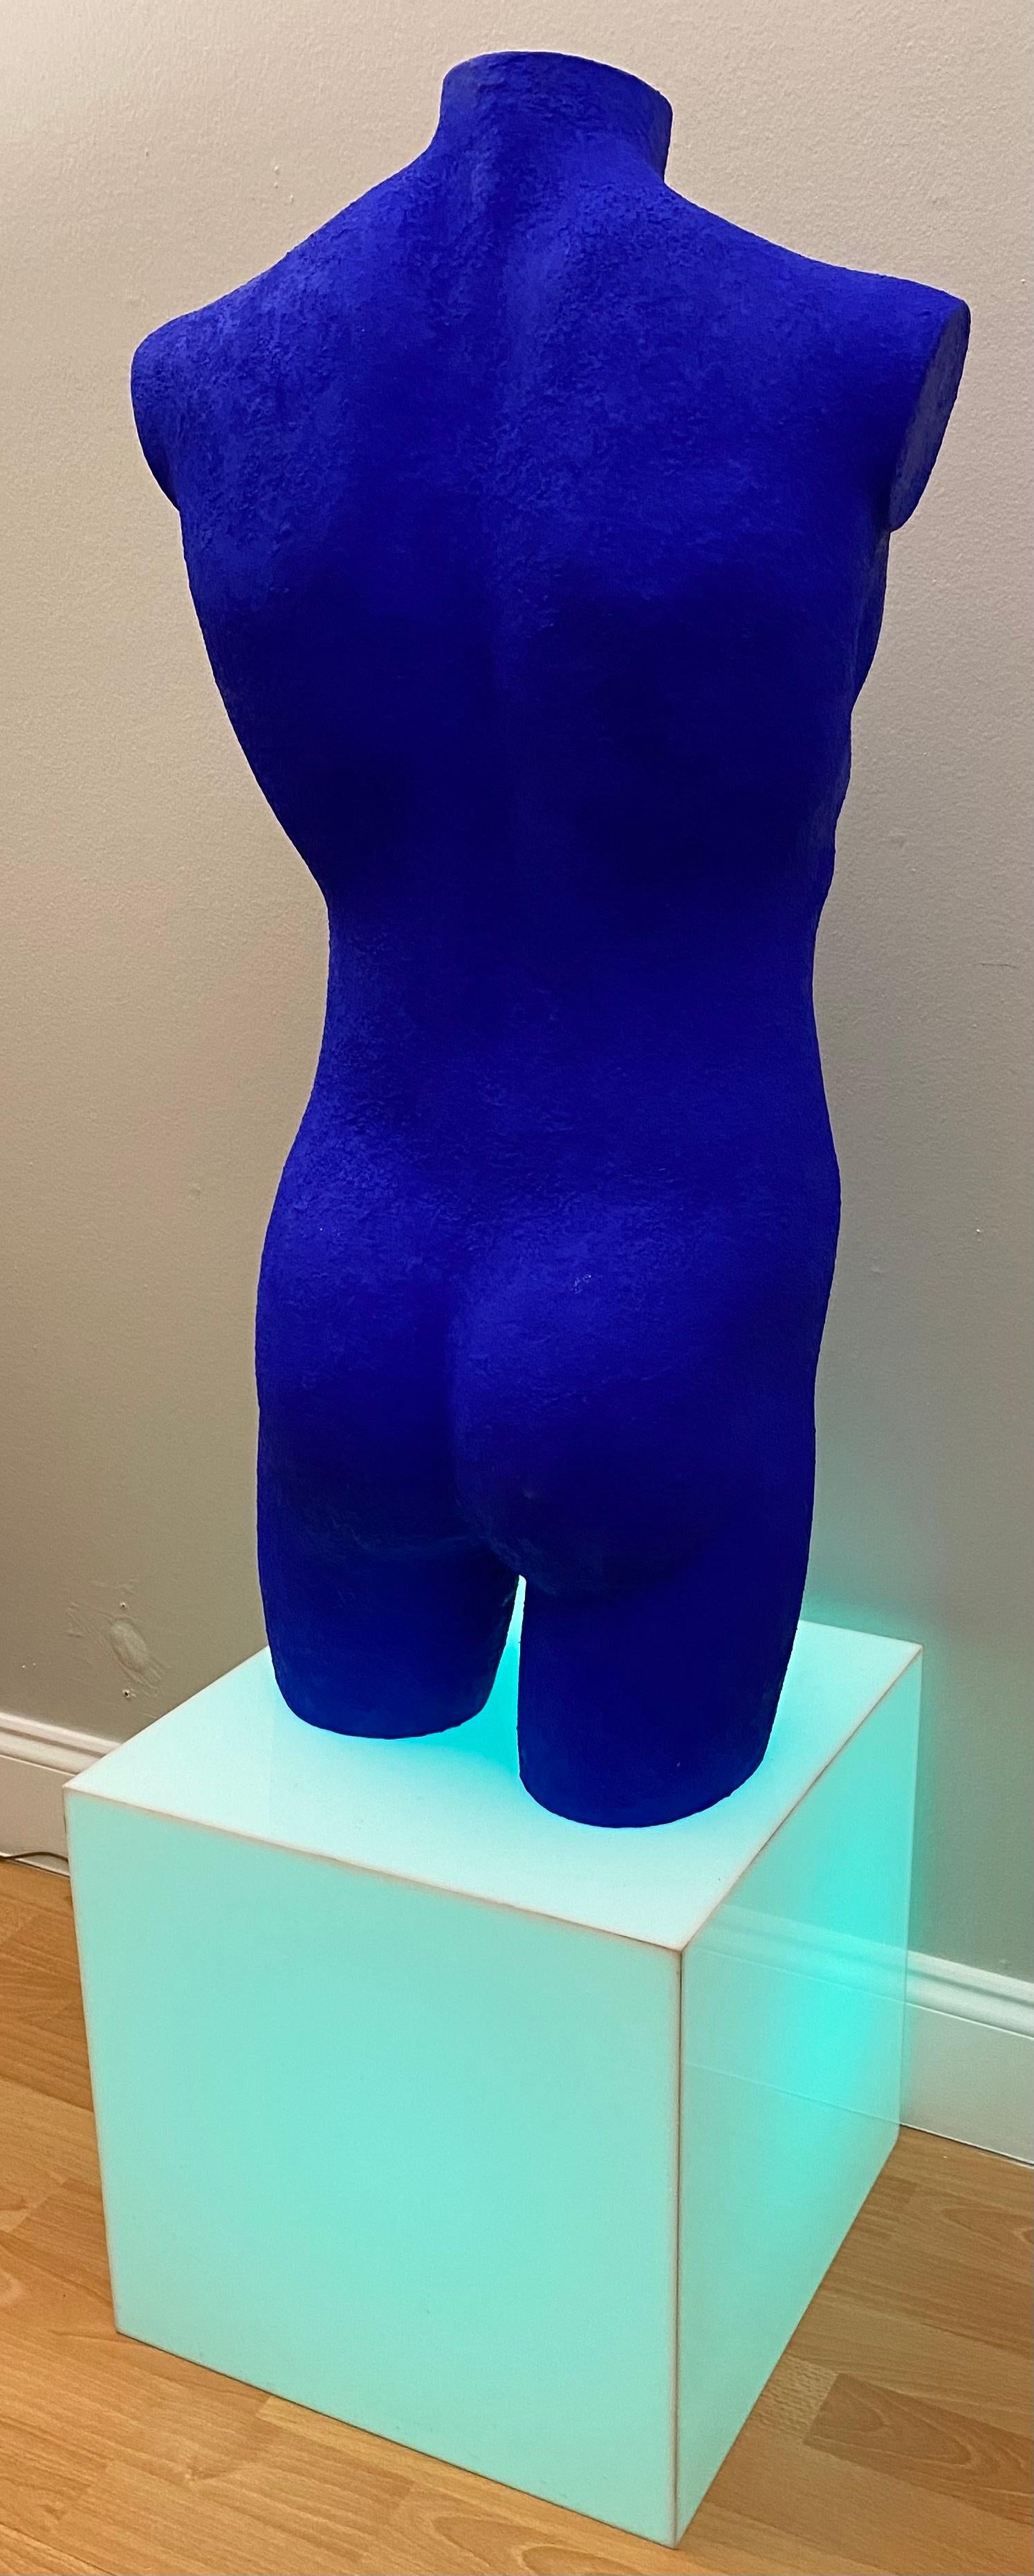 French Male Nude Torso Blue Man Sculpture  For Sale